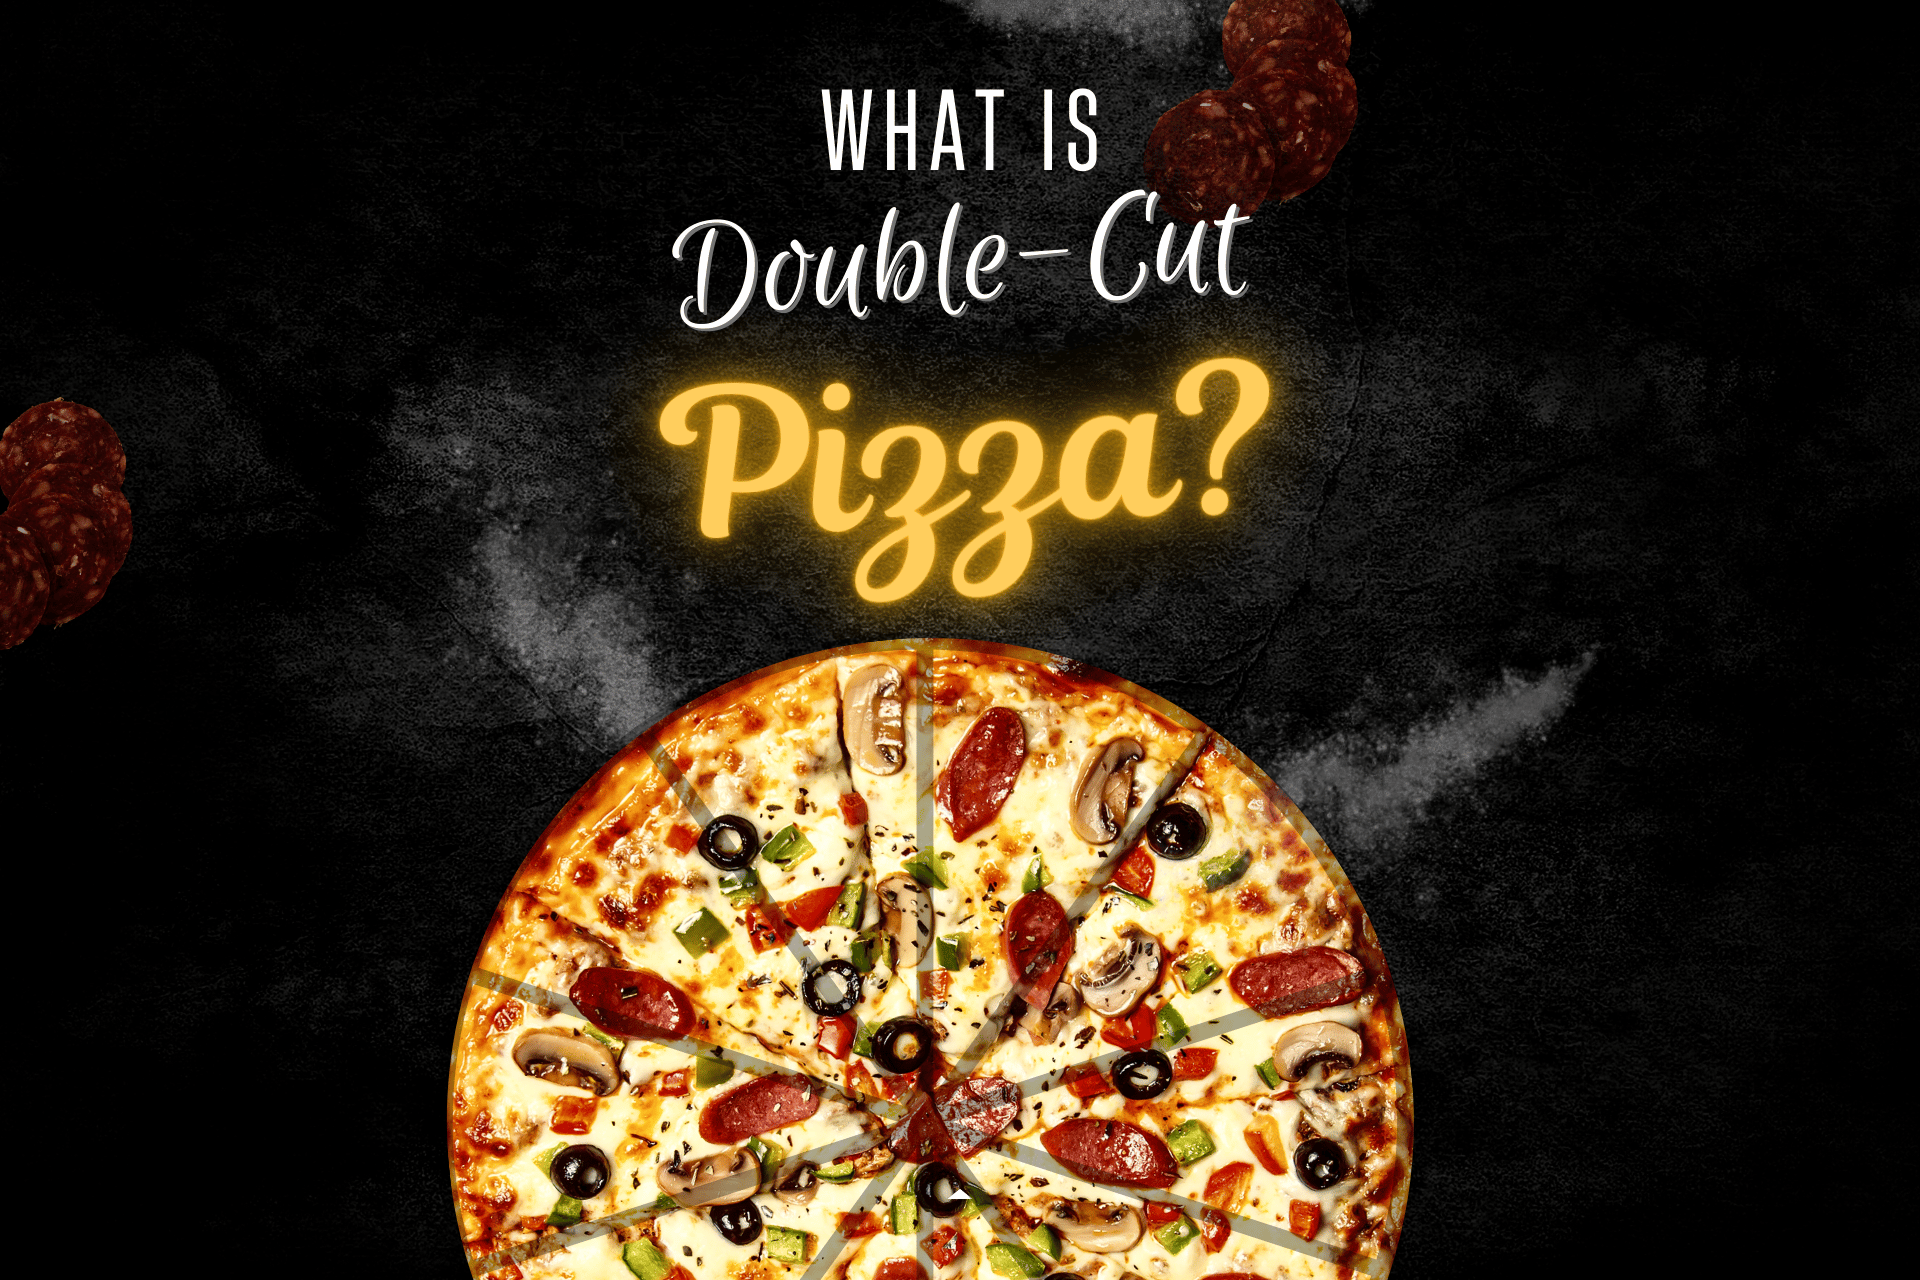 What is Double Cut Pizza